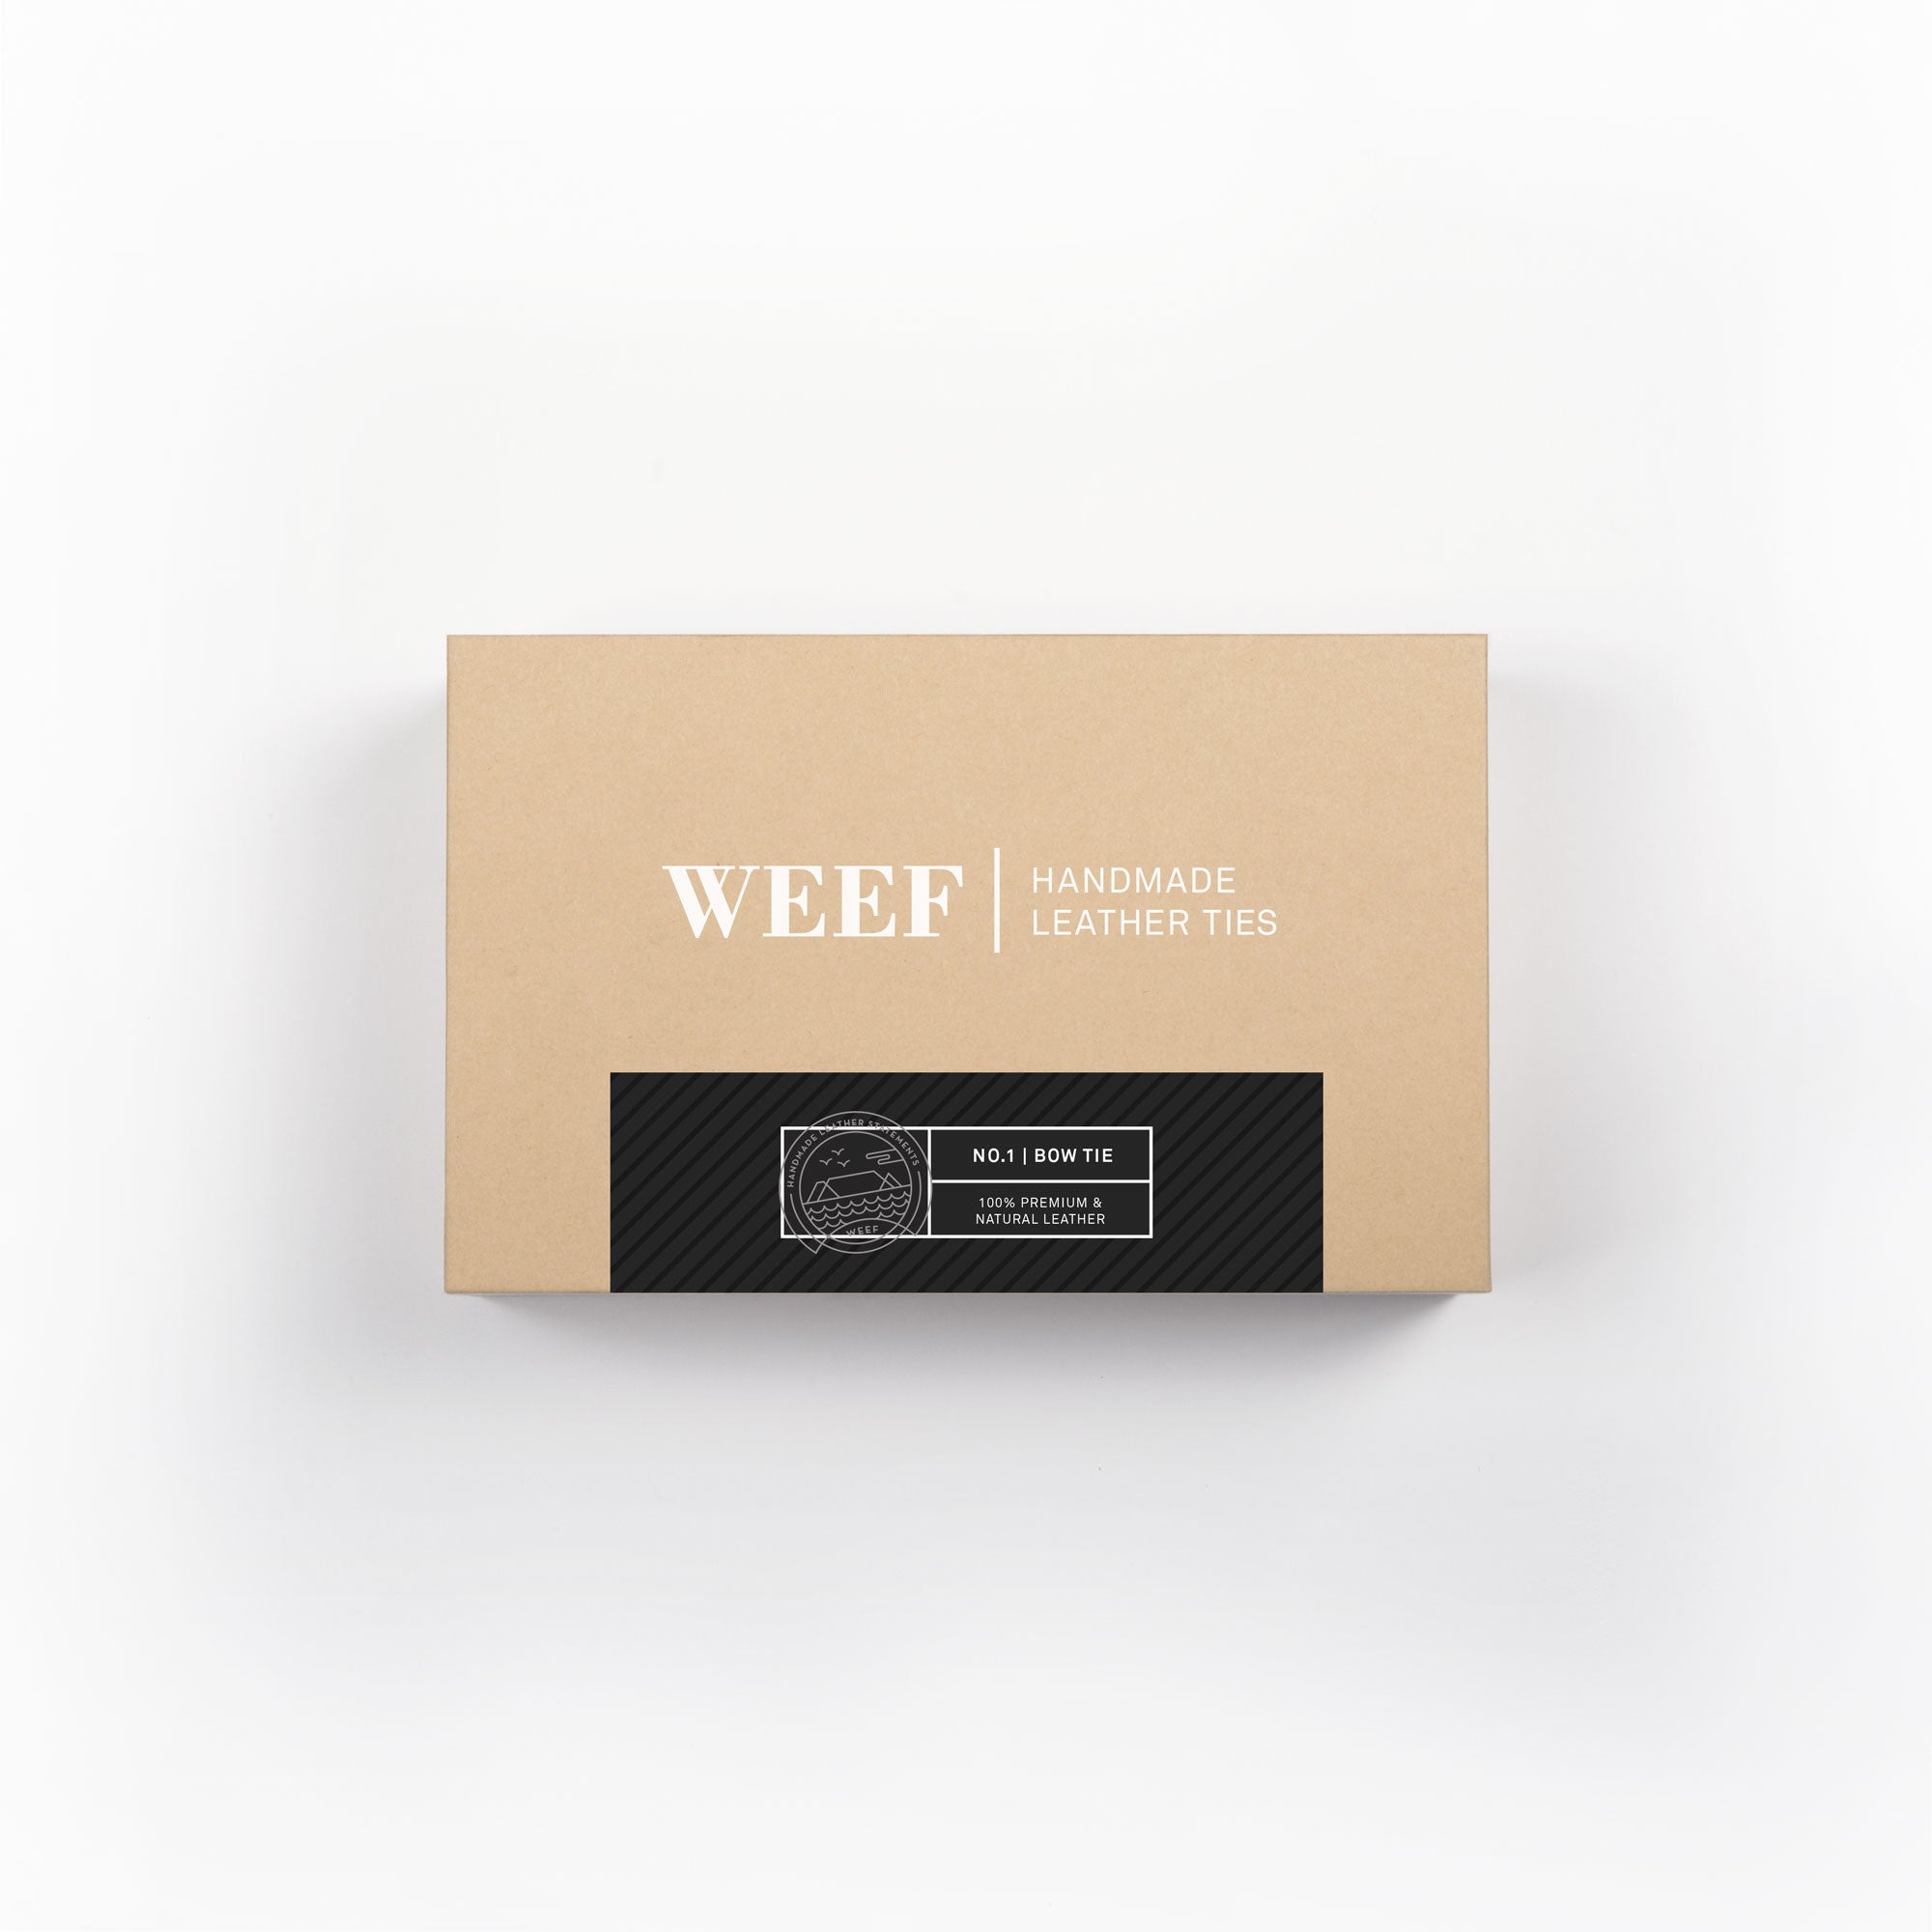 This is the premium packaging box of the matt black WEEF handmade leather bow tie.